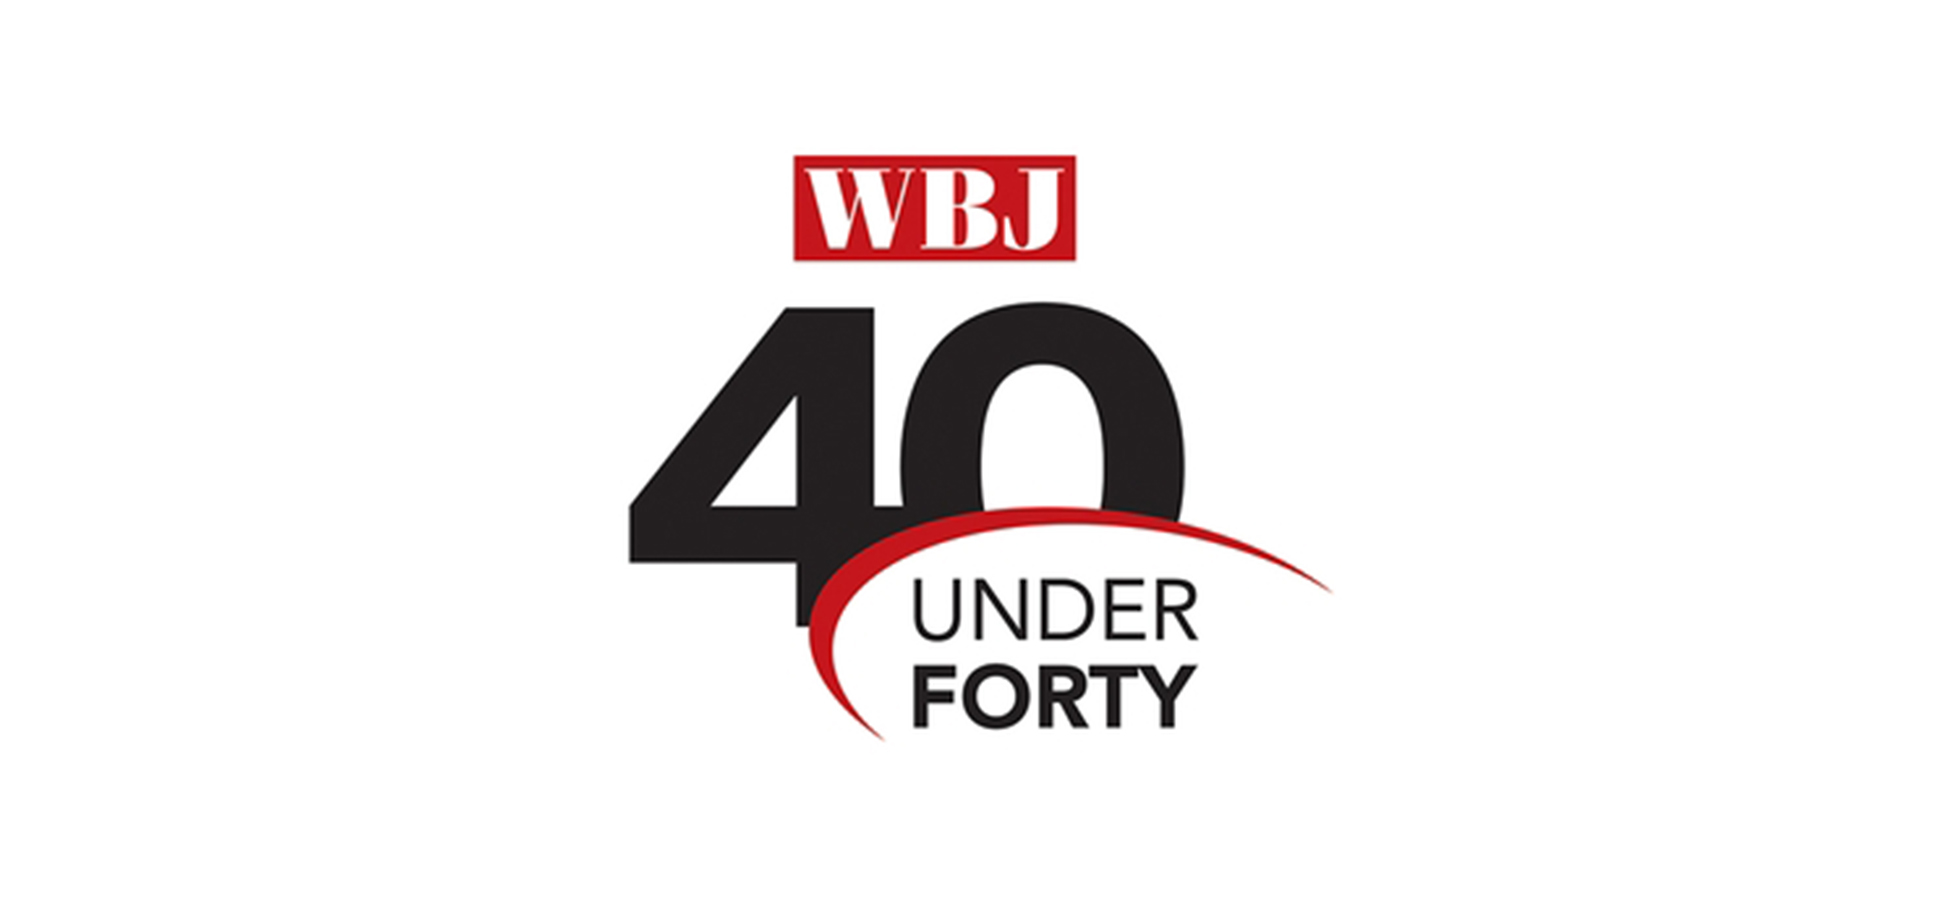 A logo from the Worcester Business Journal for its 40 under 40 program.